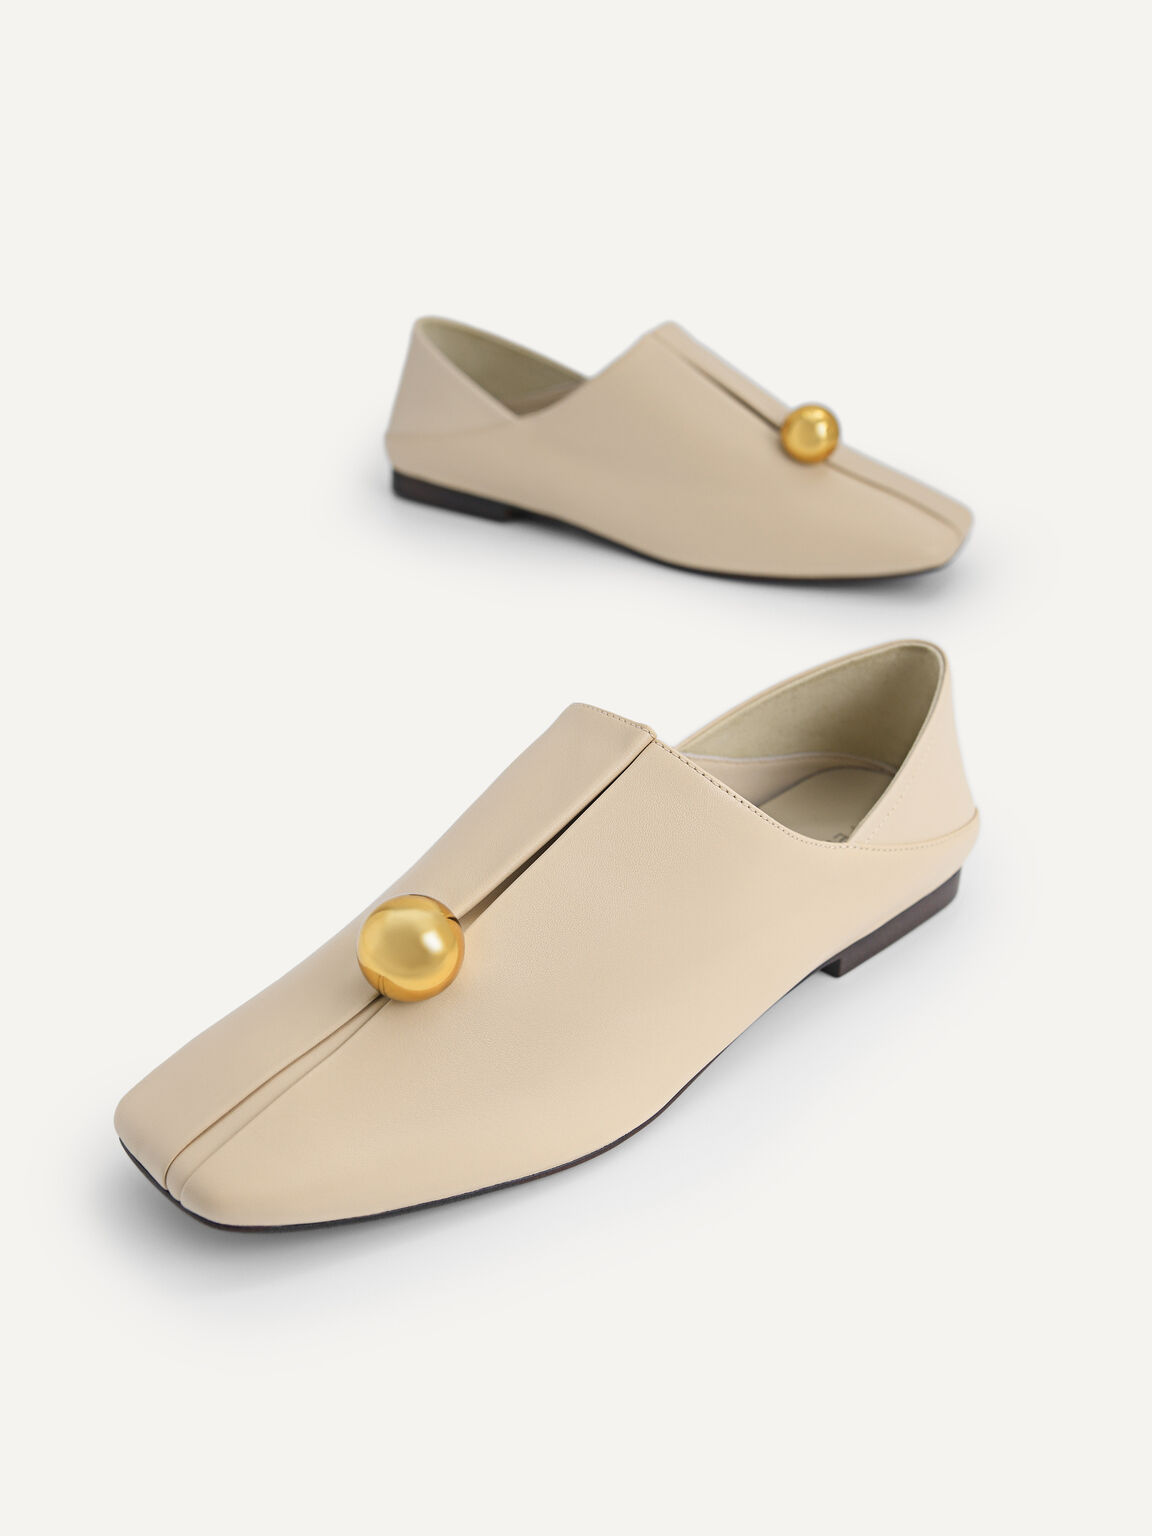 Orb Leather Flats, Beige